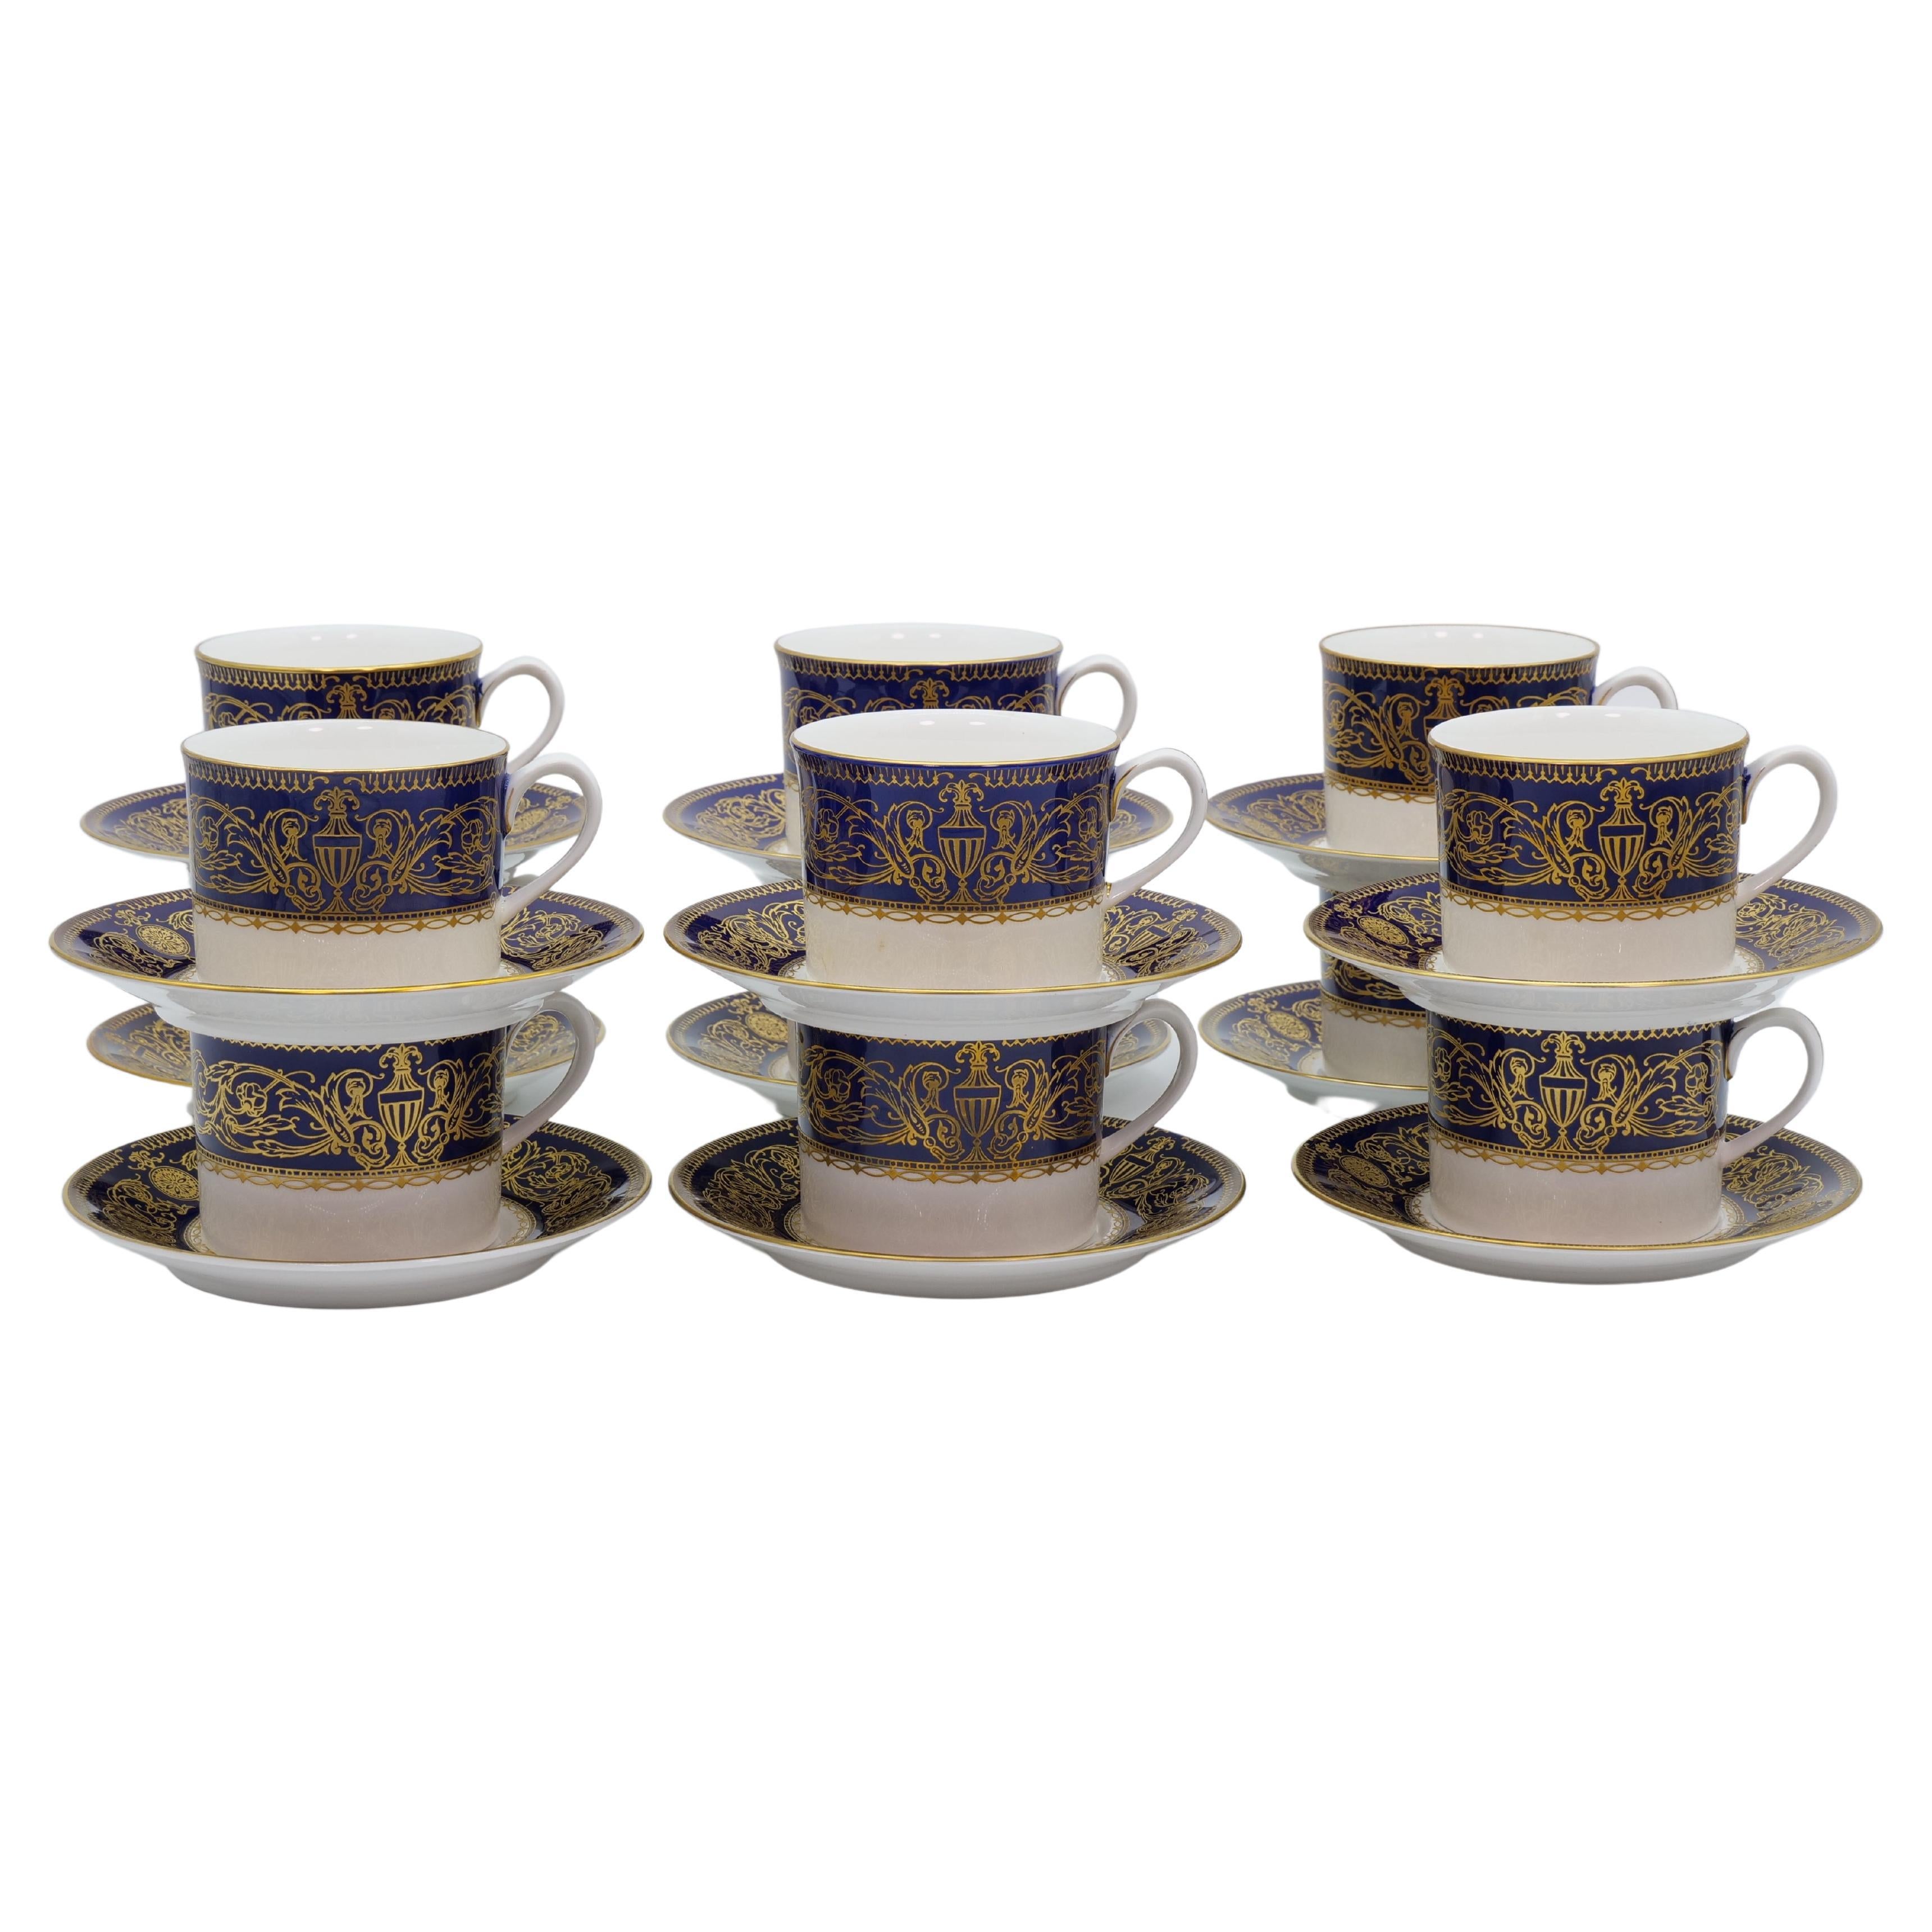 Mid-20th Century English Porcelain & Gilt Dinner Service For 12 People/ Serving Pieces